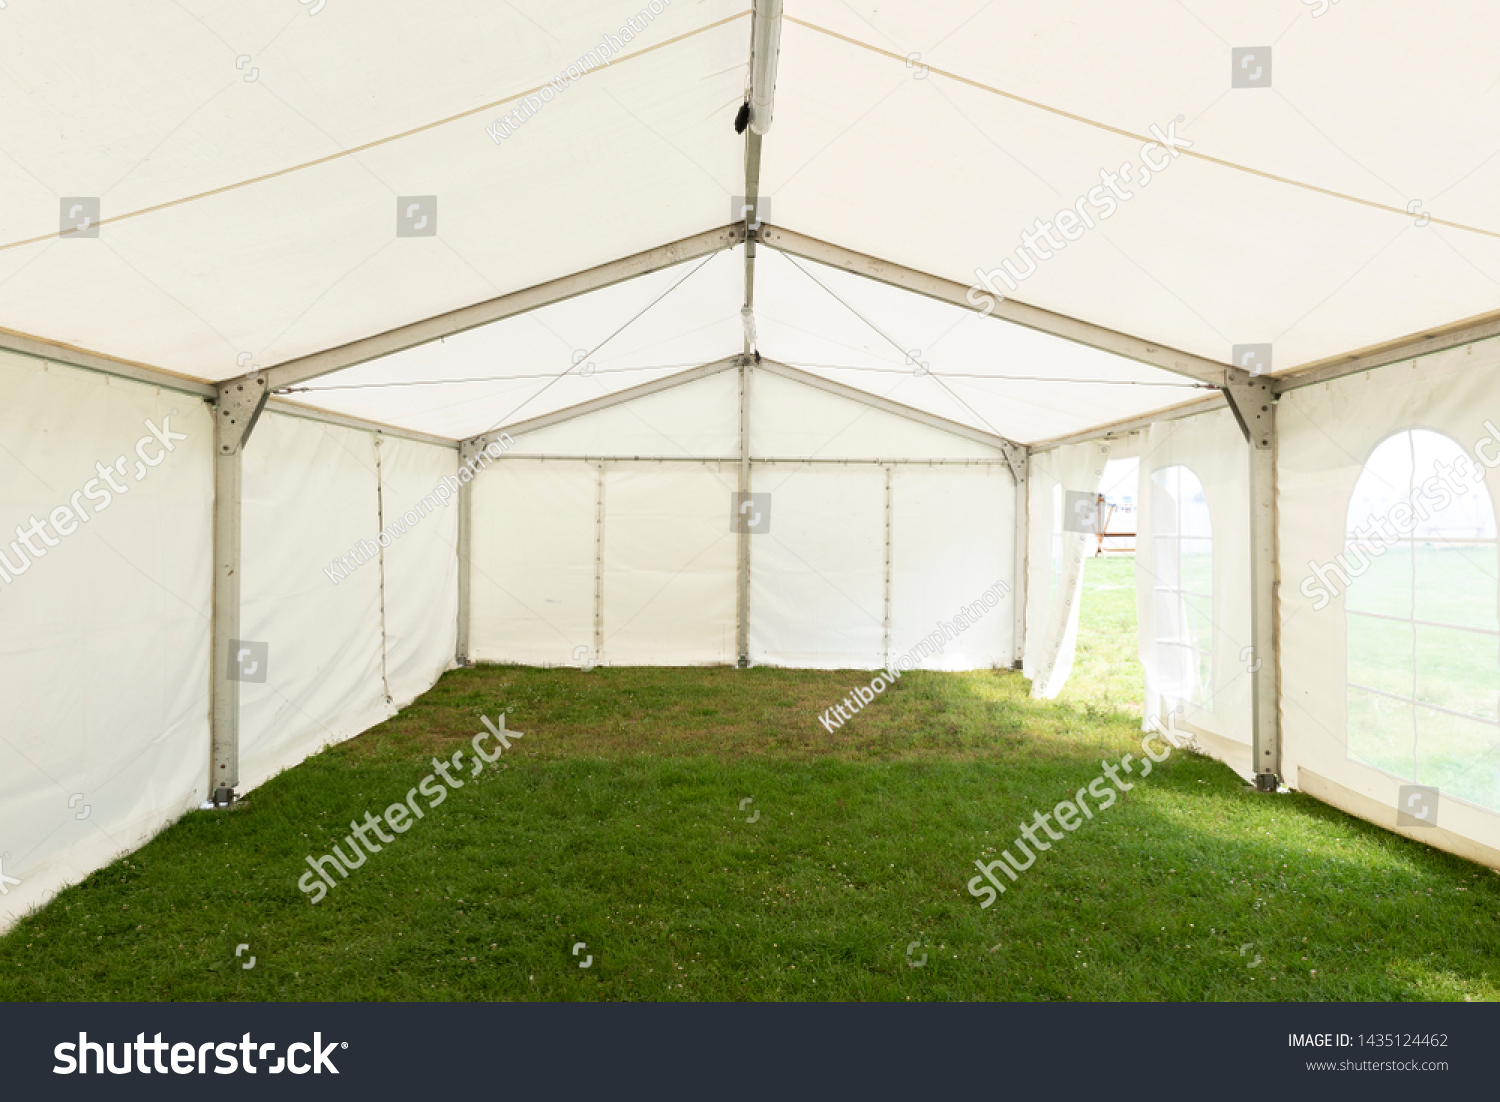 Inside empty white tent waiting for event arrangement #1435124462